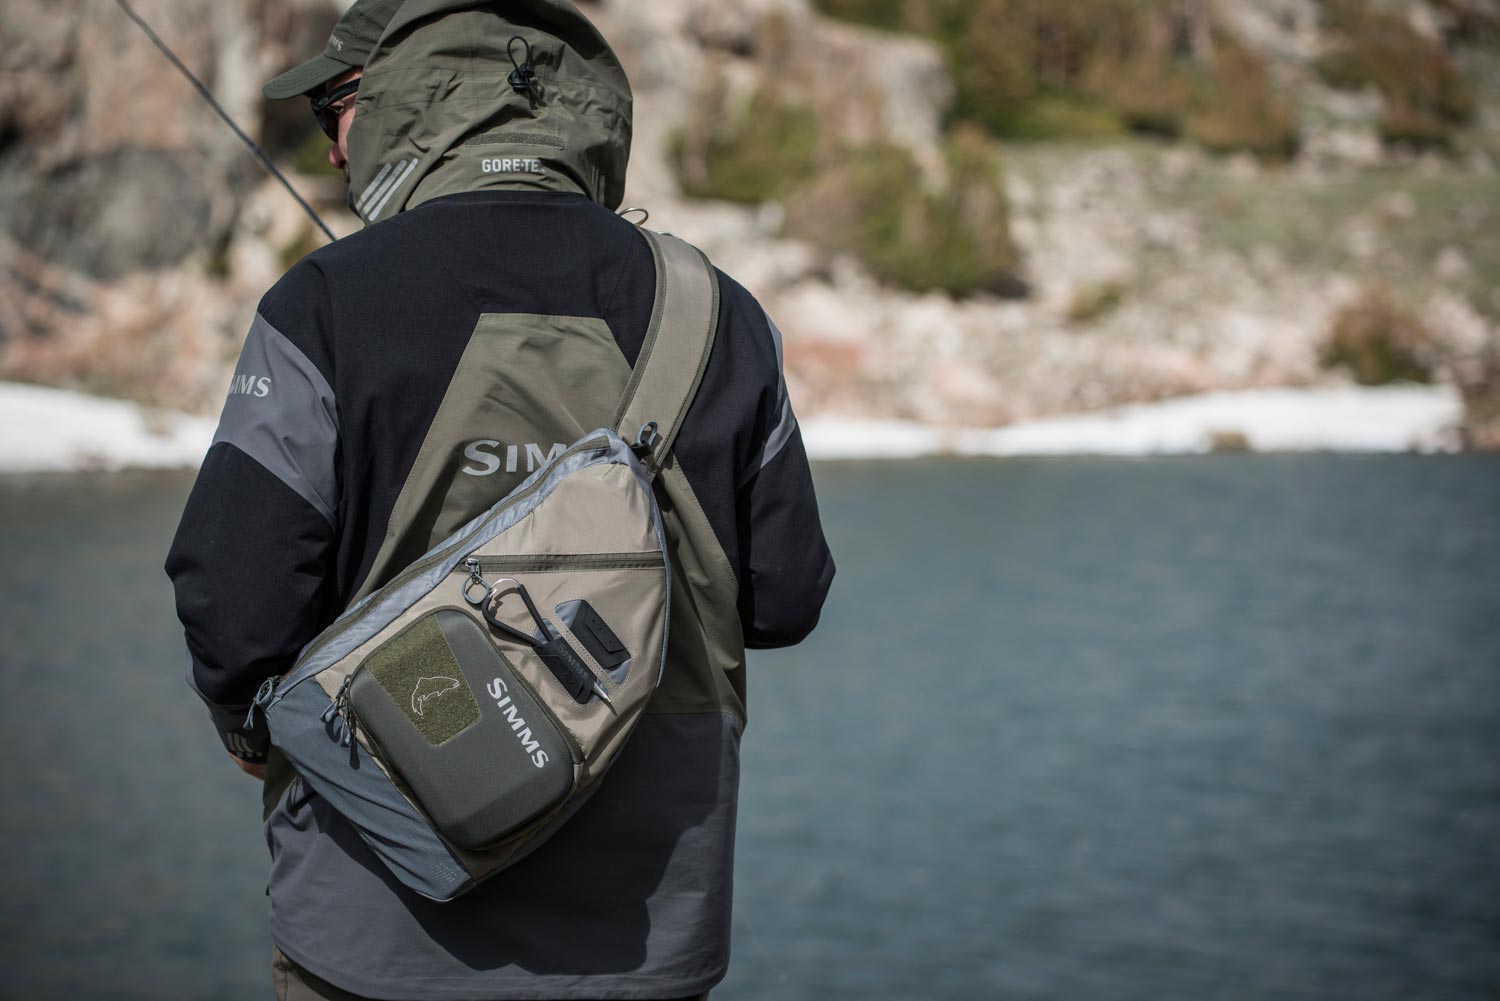 Top 5 rated fly fishing sling bags and tackle pack review